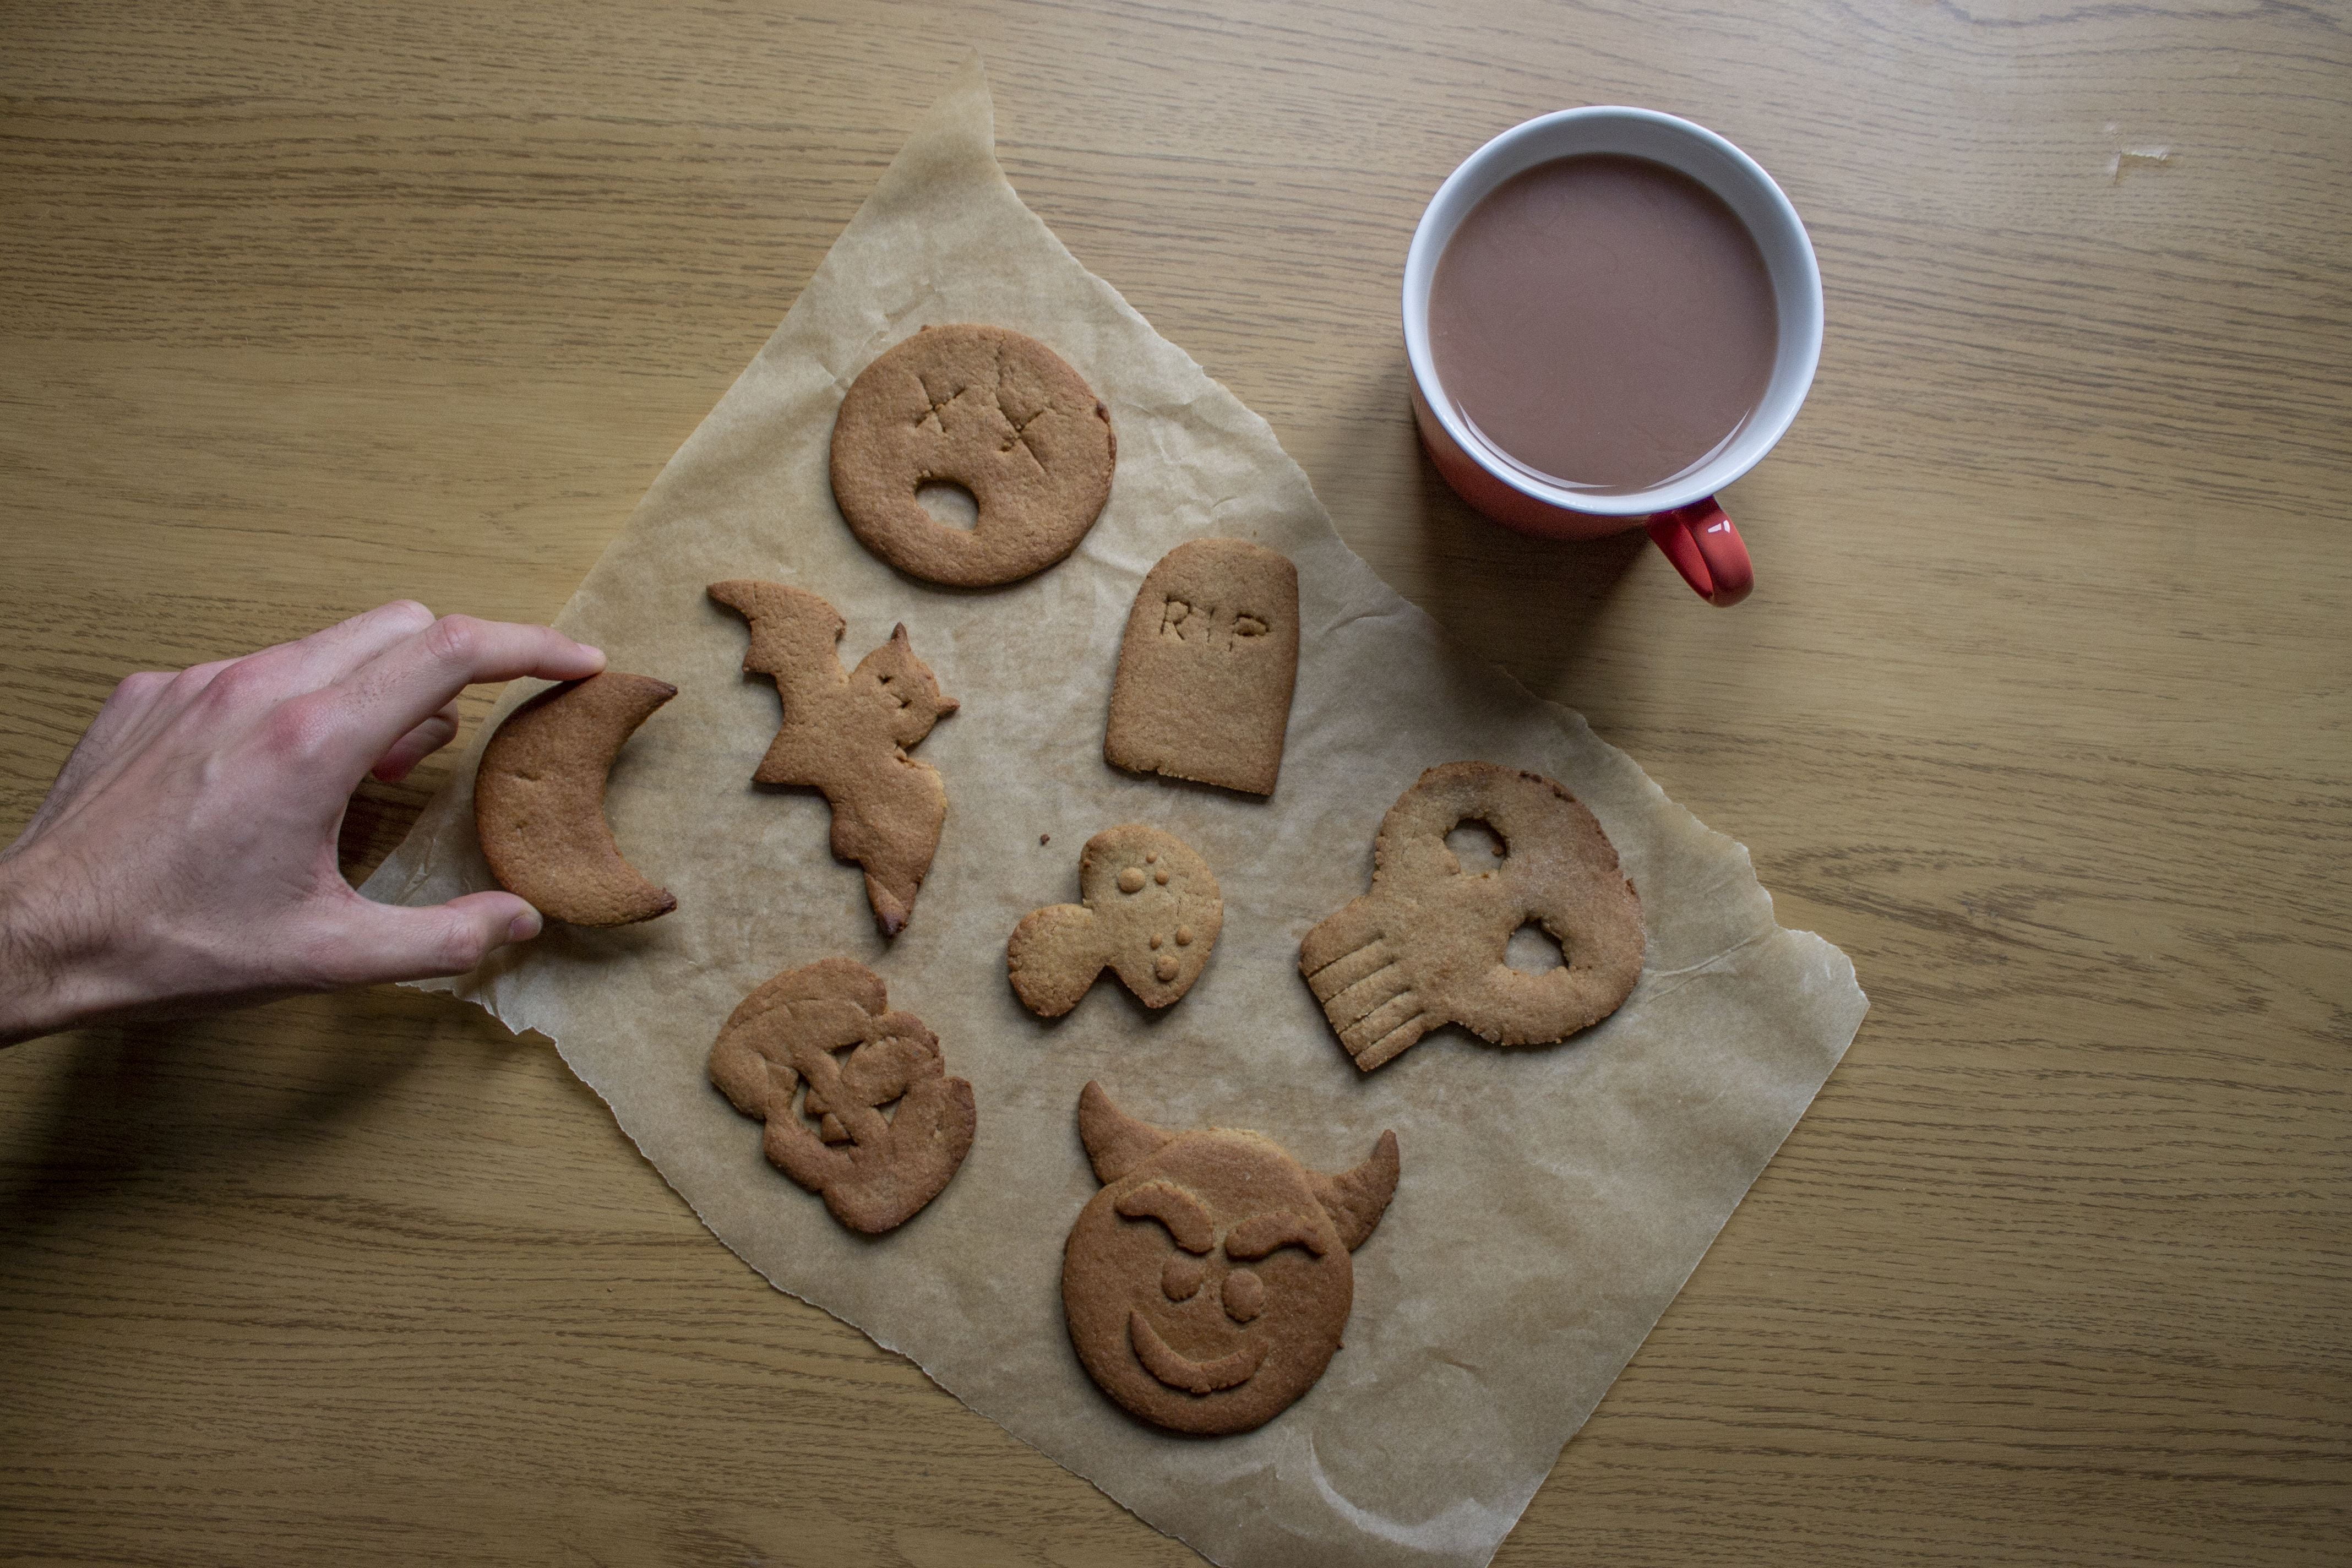 The finished cookies with a cup of tea